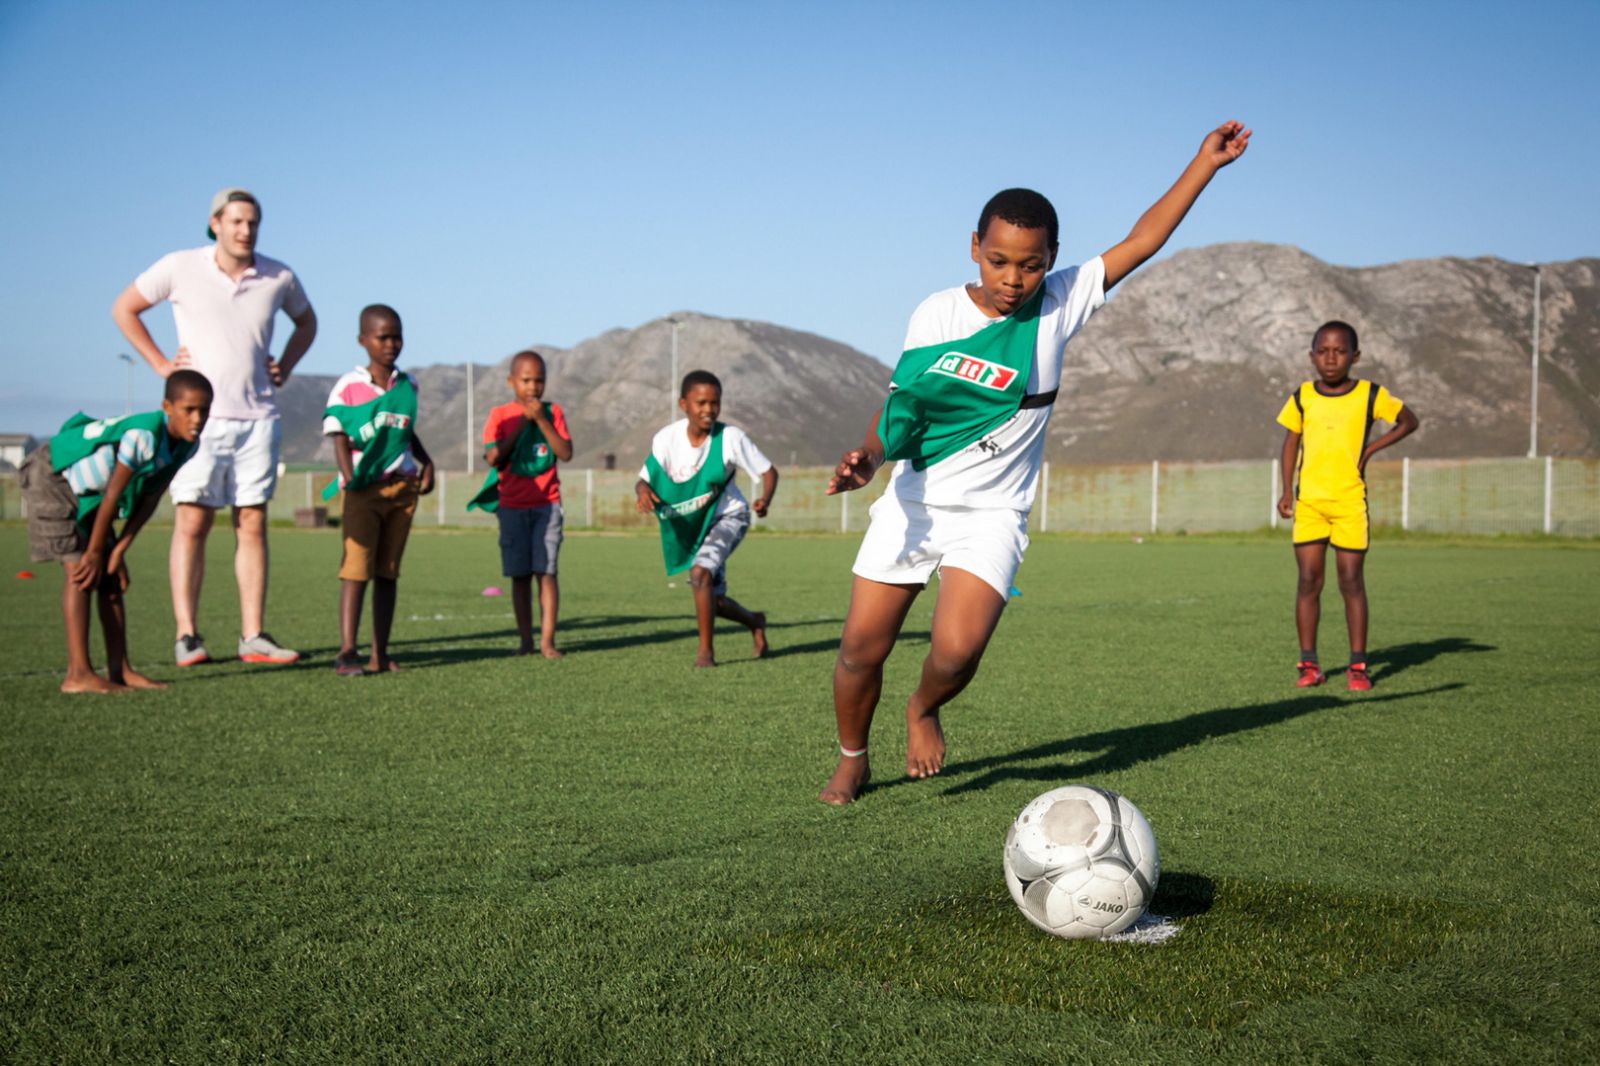 The Football Foundation belonging to Grootbos in South Africa